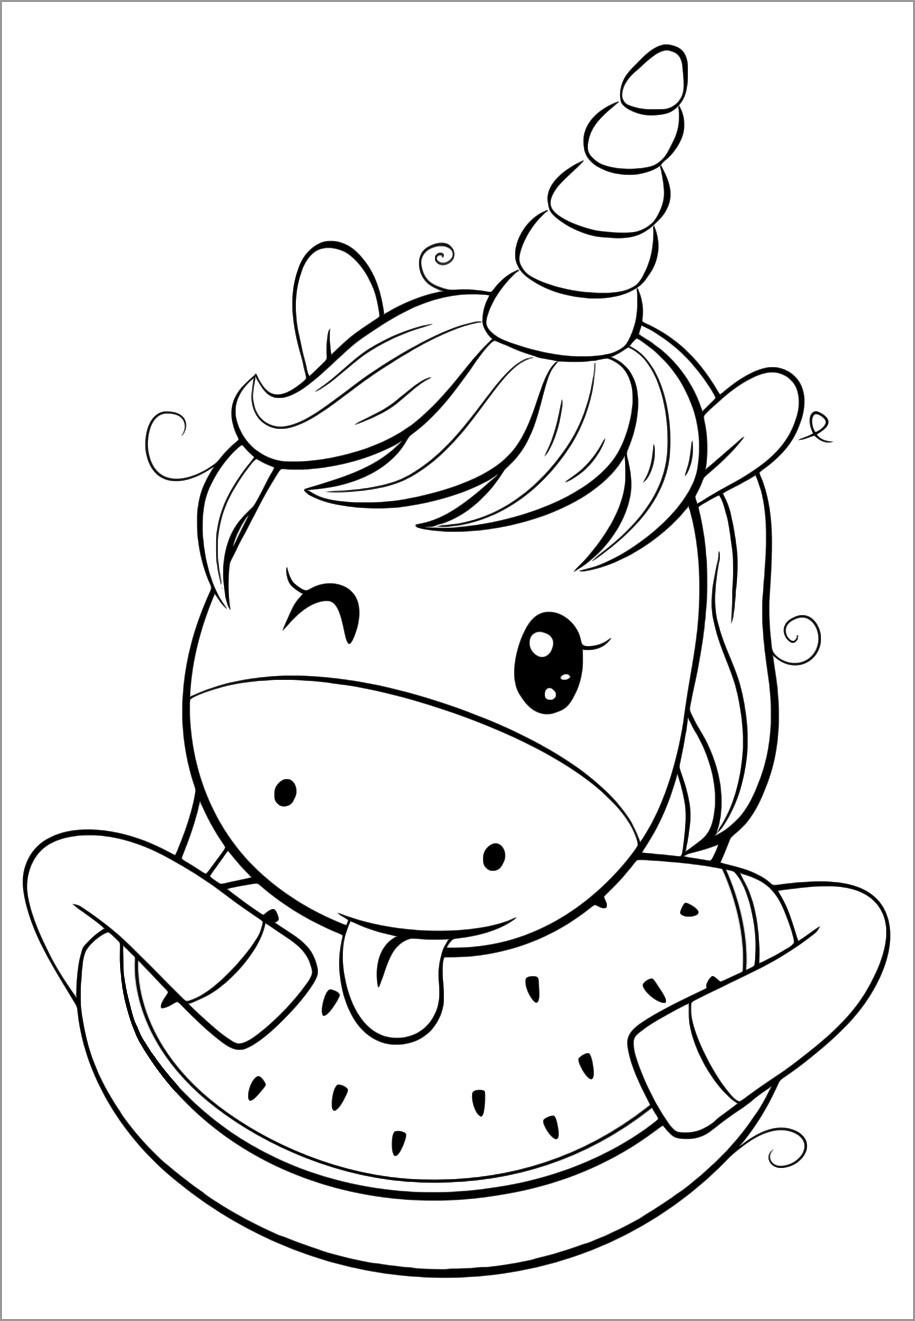 Unicorn Donut Coloring Page   ColoringBay